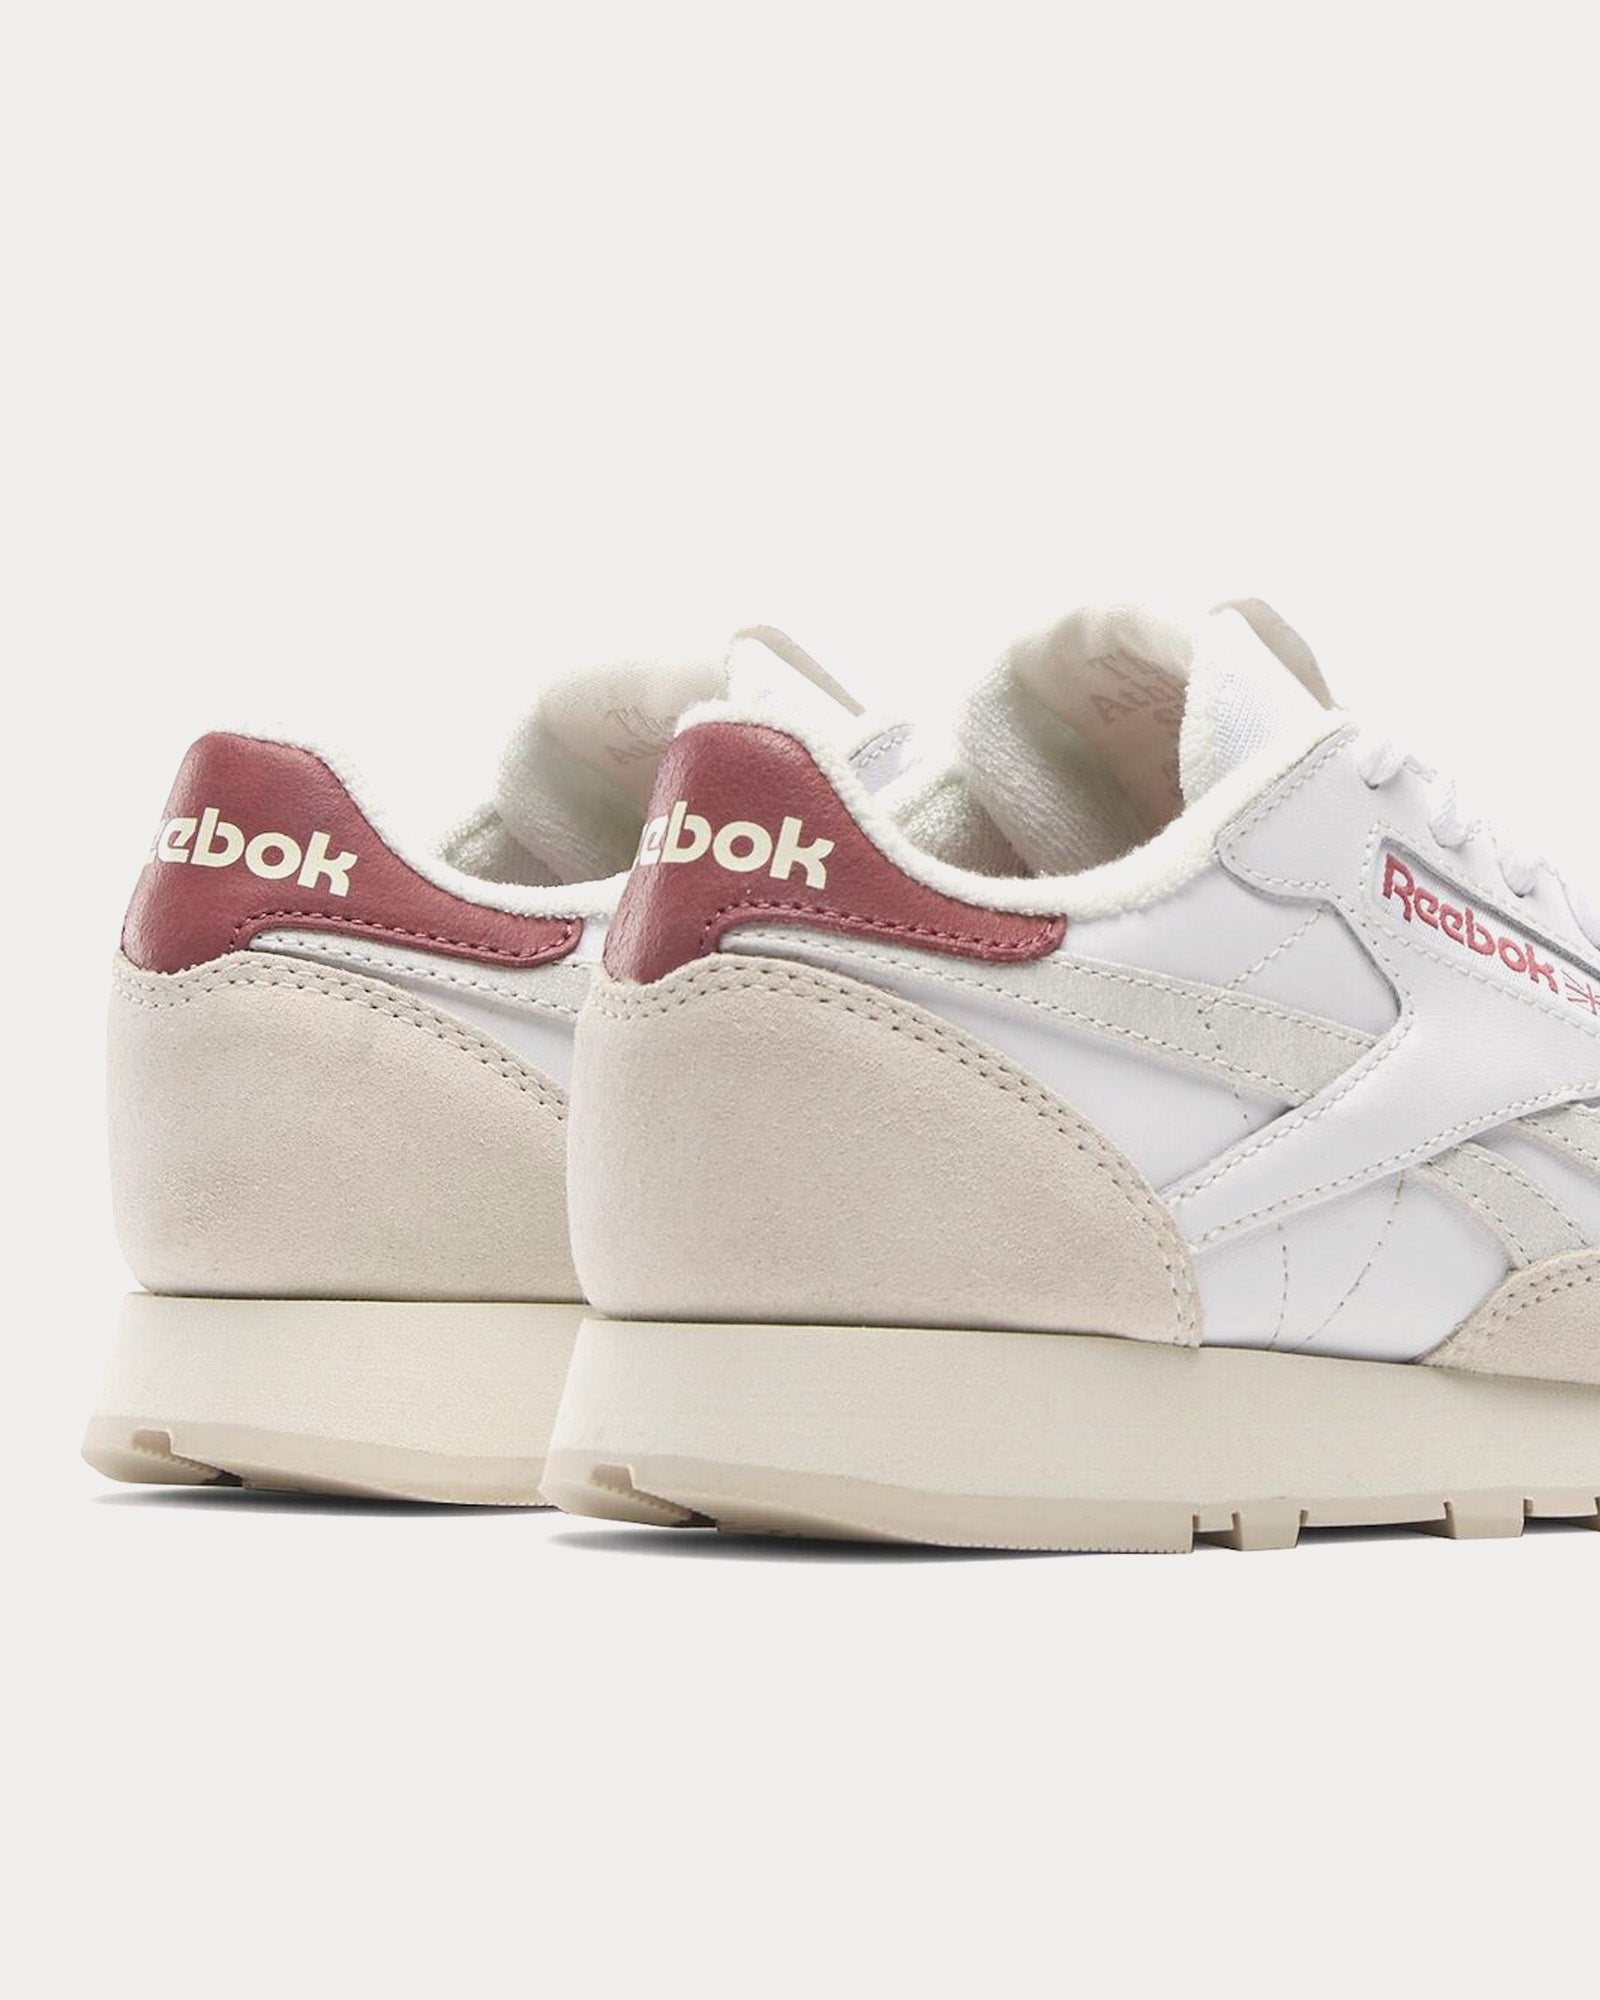 Reebok - Classic Leather Cloud White / Chalk / Sedona Rose Low Top Sneakers